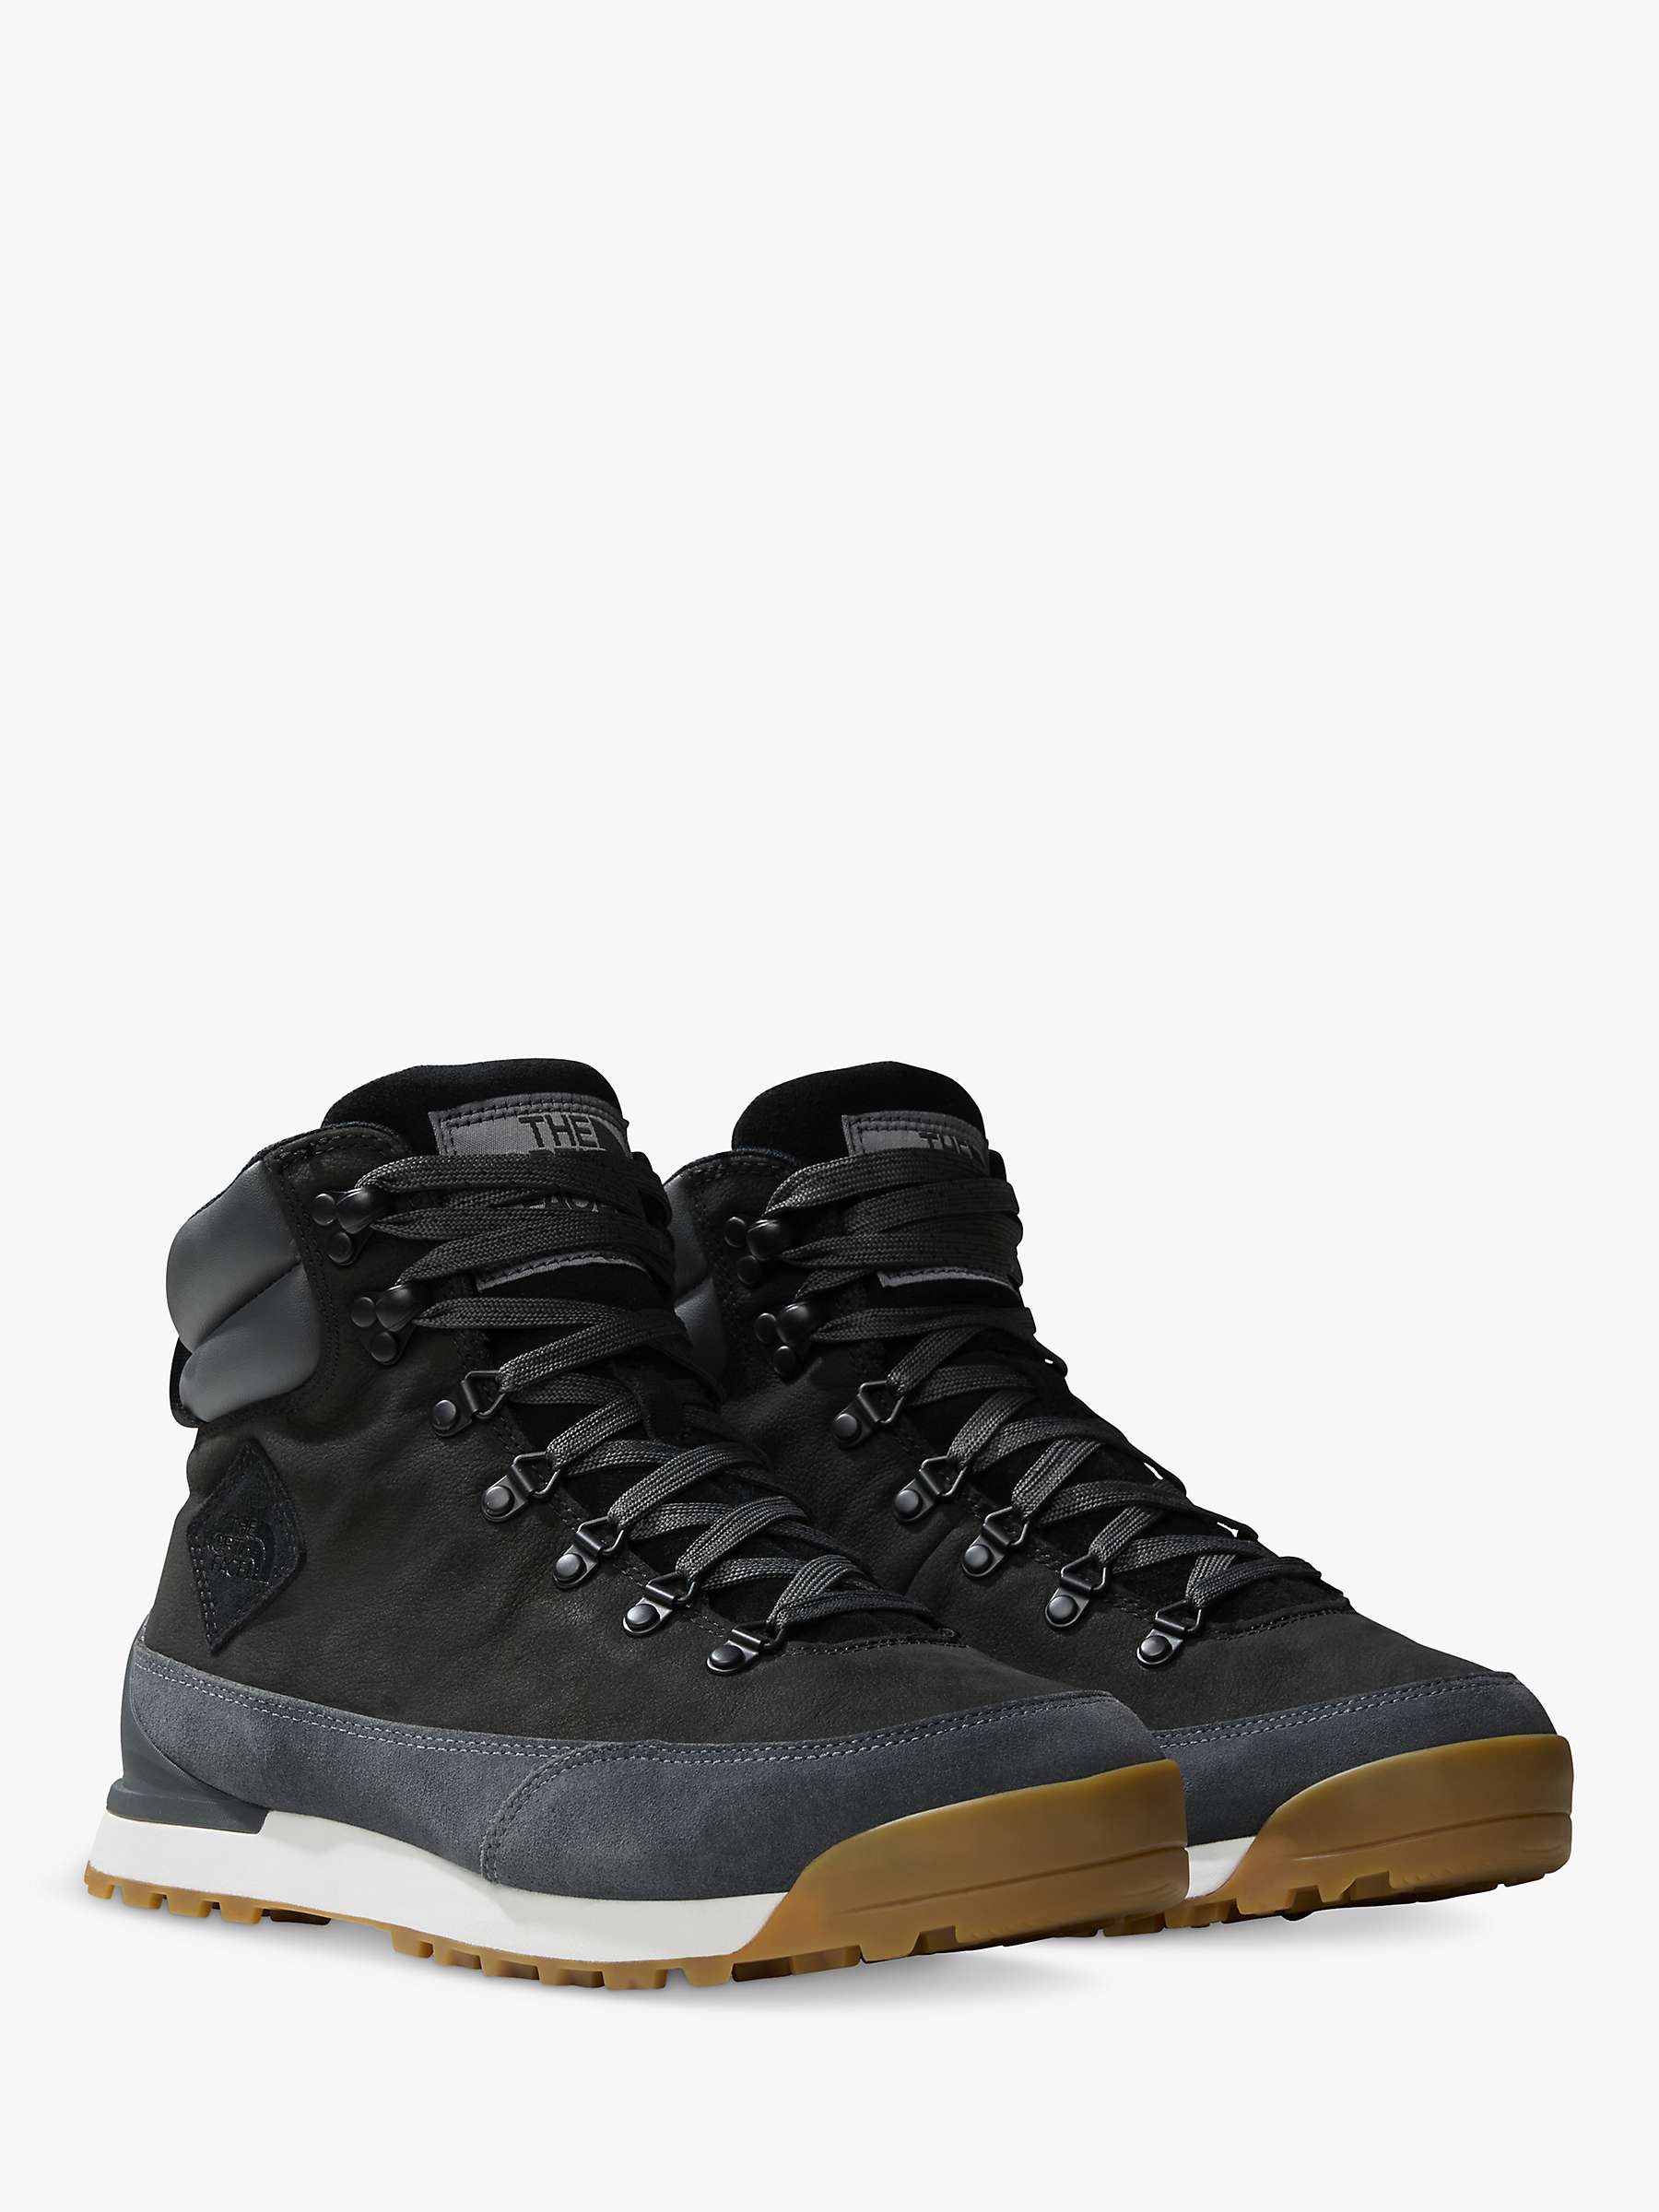 Buy The North Face Back-To-Berkeley IV Men's Hiking Boots Online at johnlewis.com